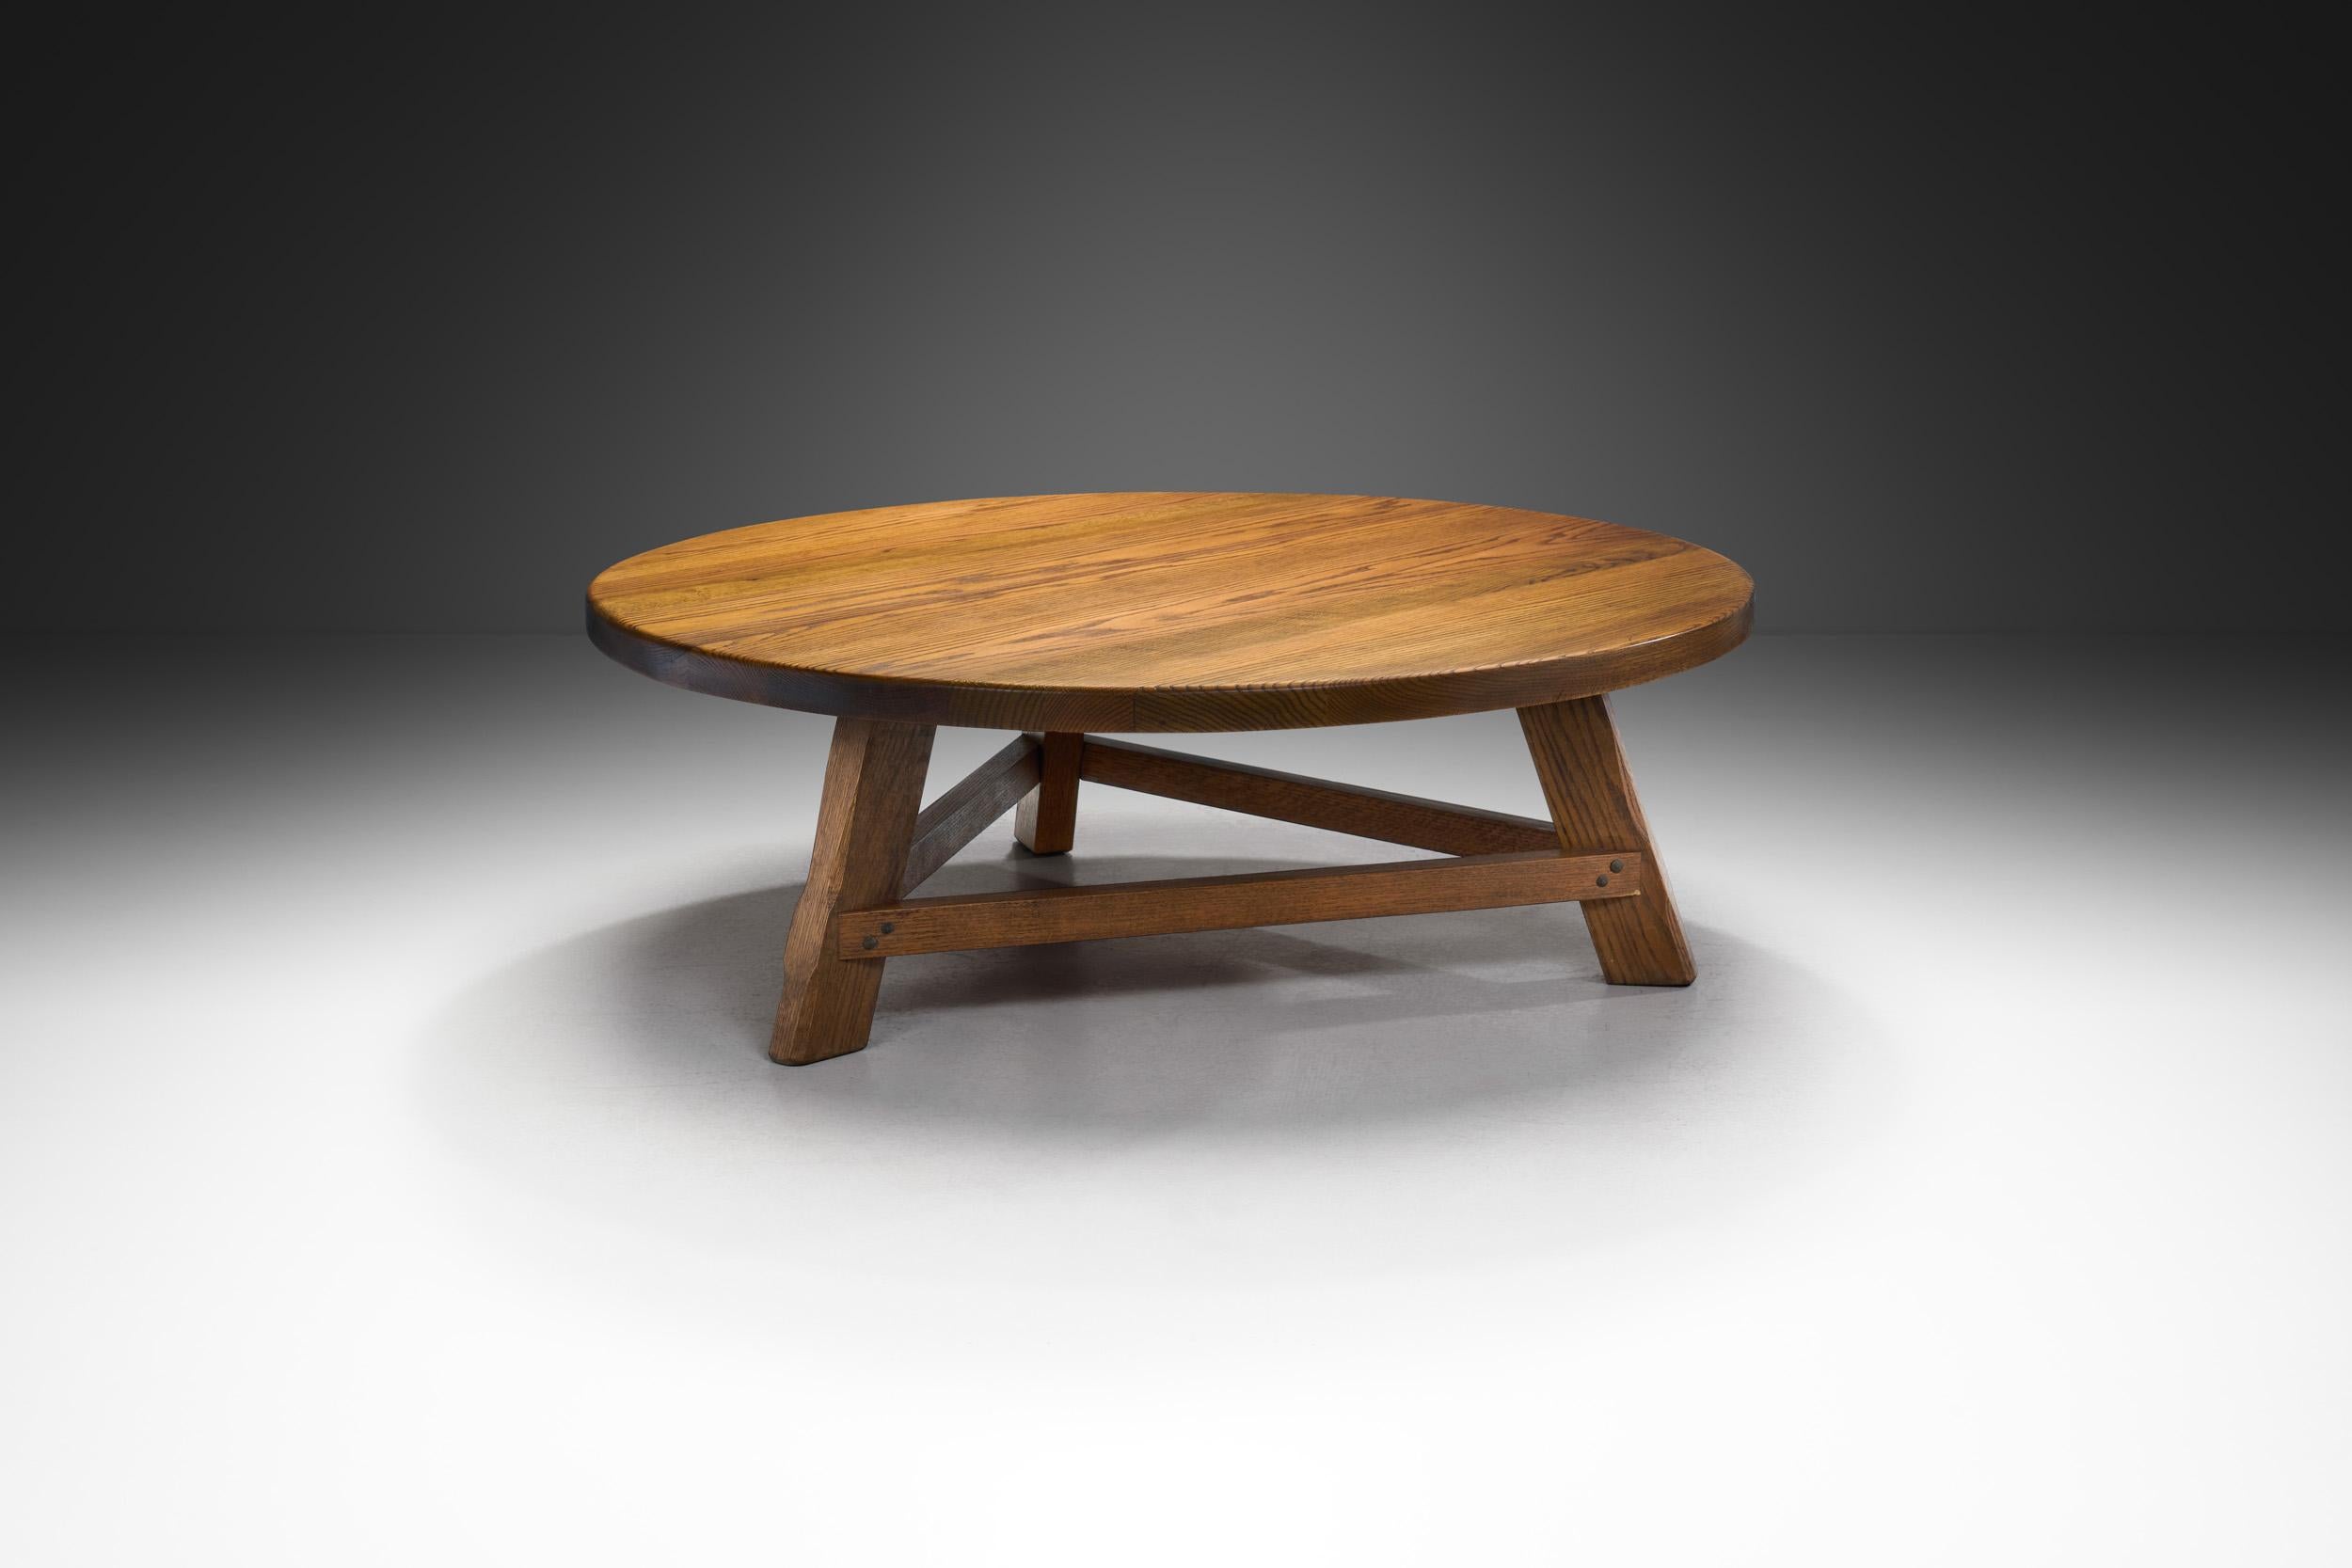 Mid-20th Century Brutalist Oak Coffee Table with Triangular Legs, Europe ca 1950s For Sale